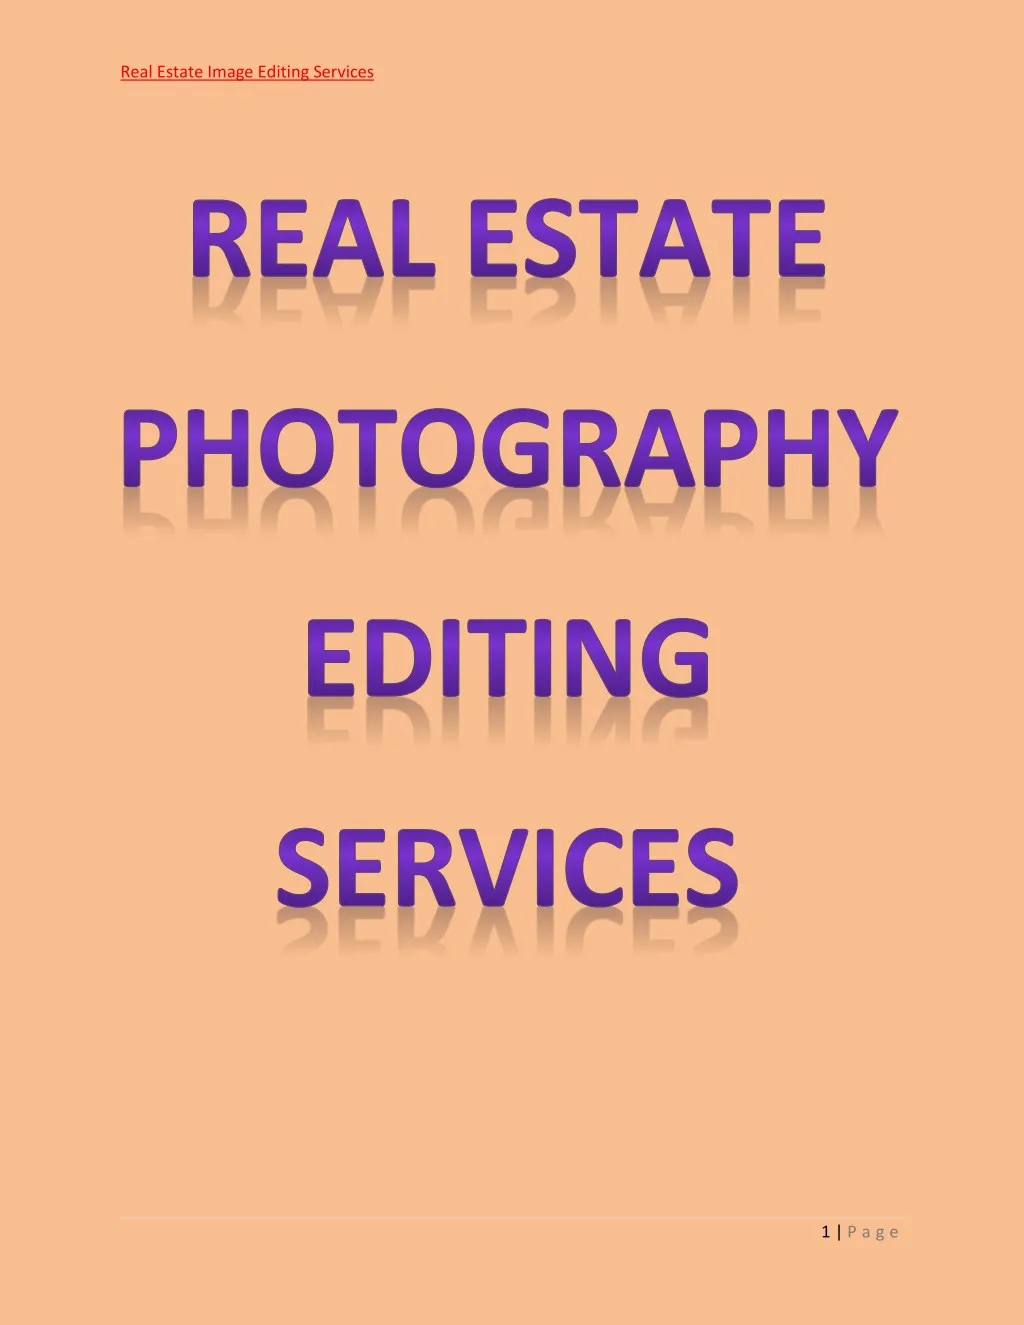 real estate image editing services n.